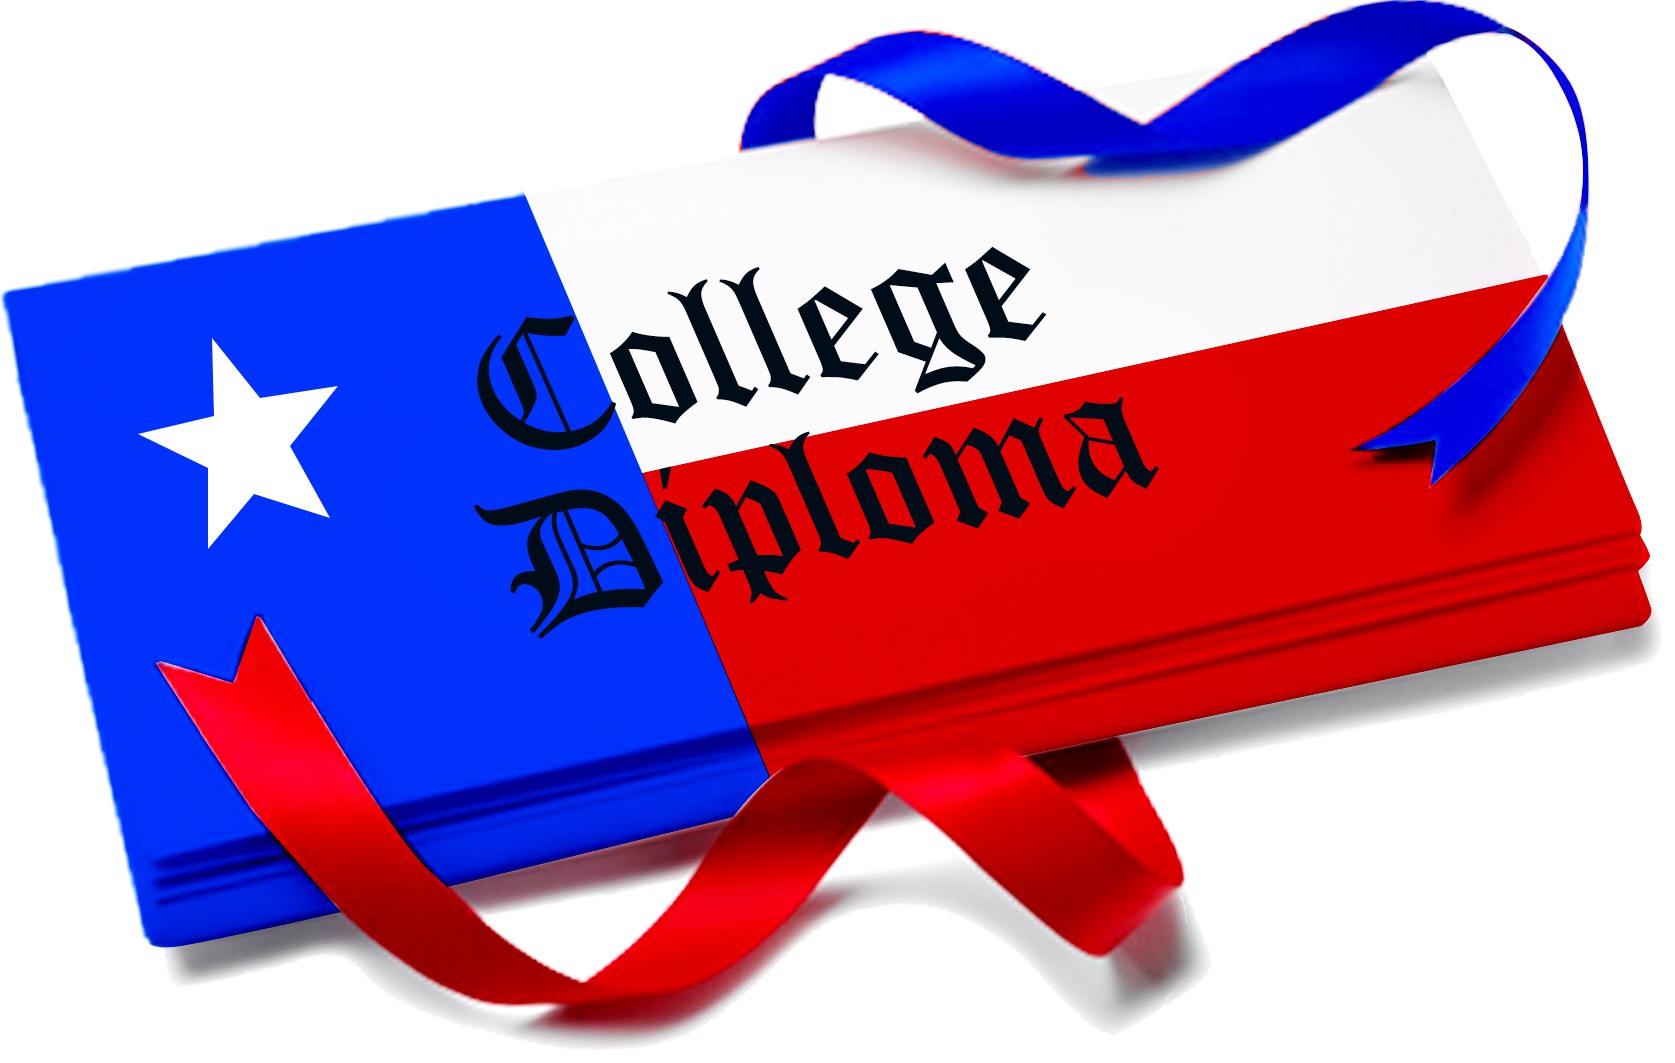 The University of Texas at El Paso College Diploma